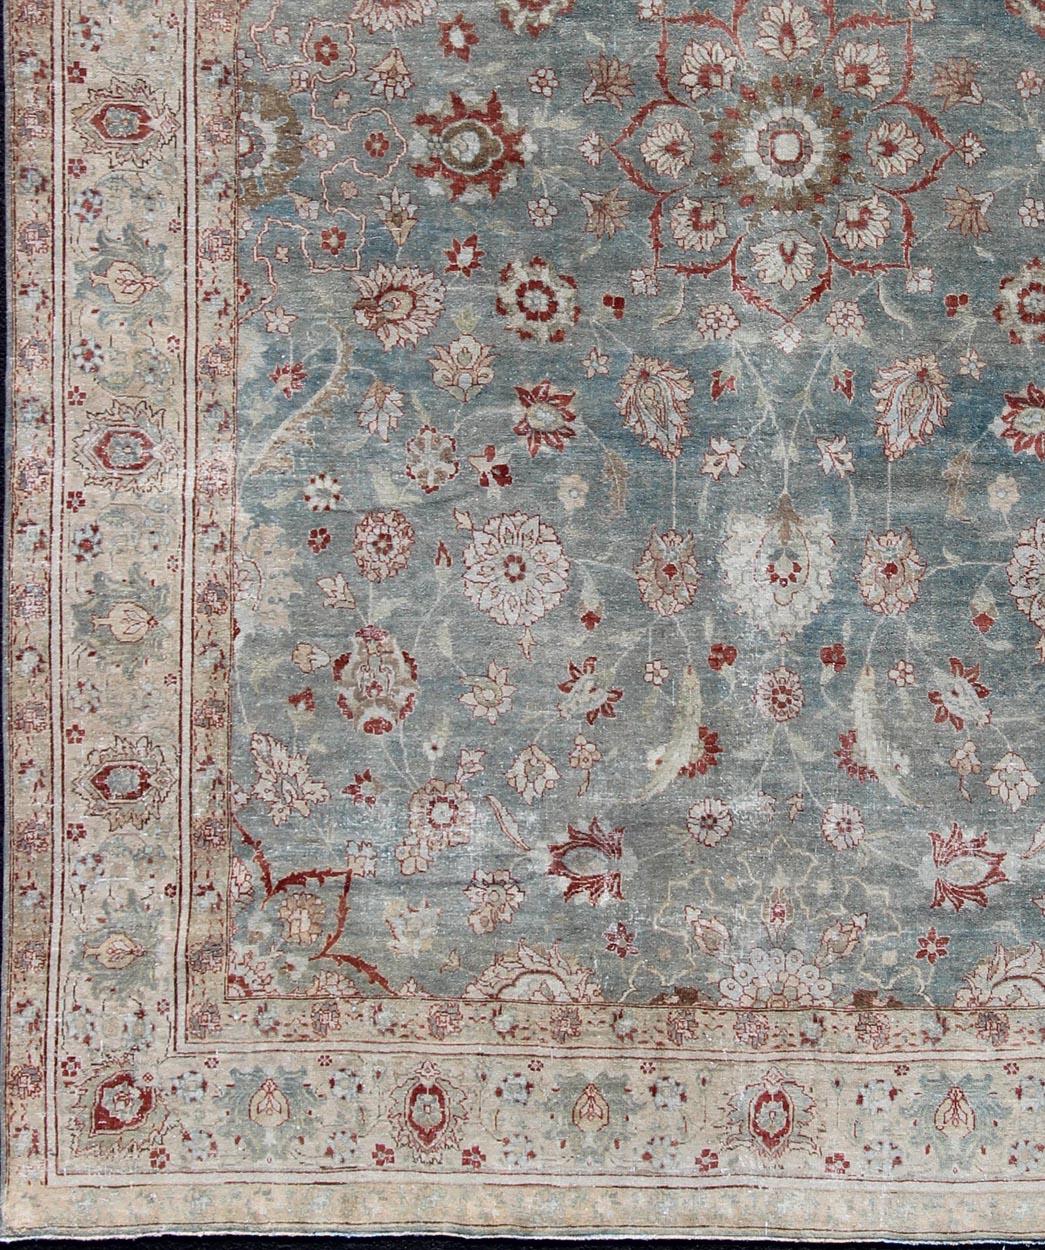 Red and blue antique Persian Tabriz rug with flowers and medallion, rug en-179642, country of origin / type: Iran / Tabriz, circa 1920.

This sublime and enchanting vintage rug, a gorgeous Tabriz rug made in Iran in the early 20th century, is a